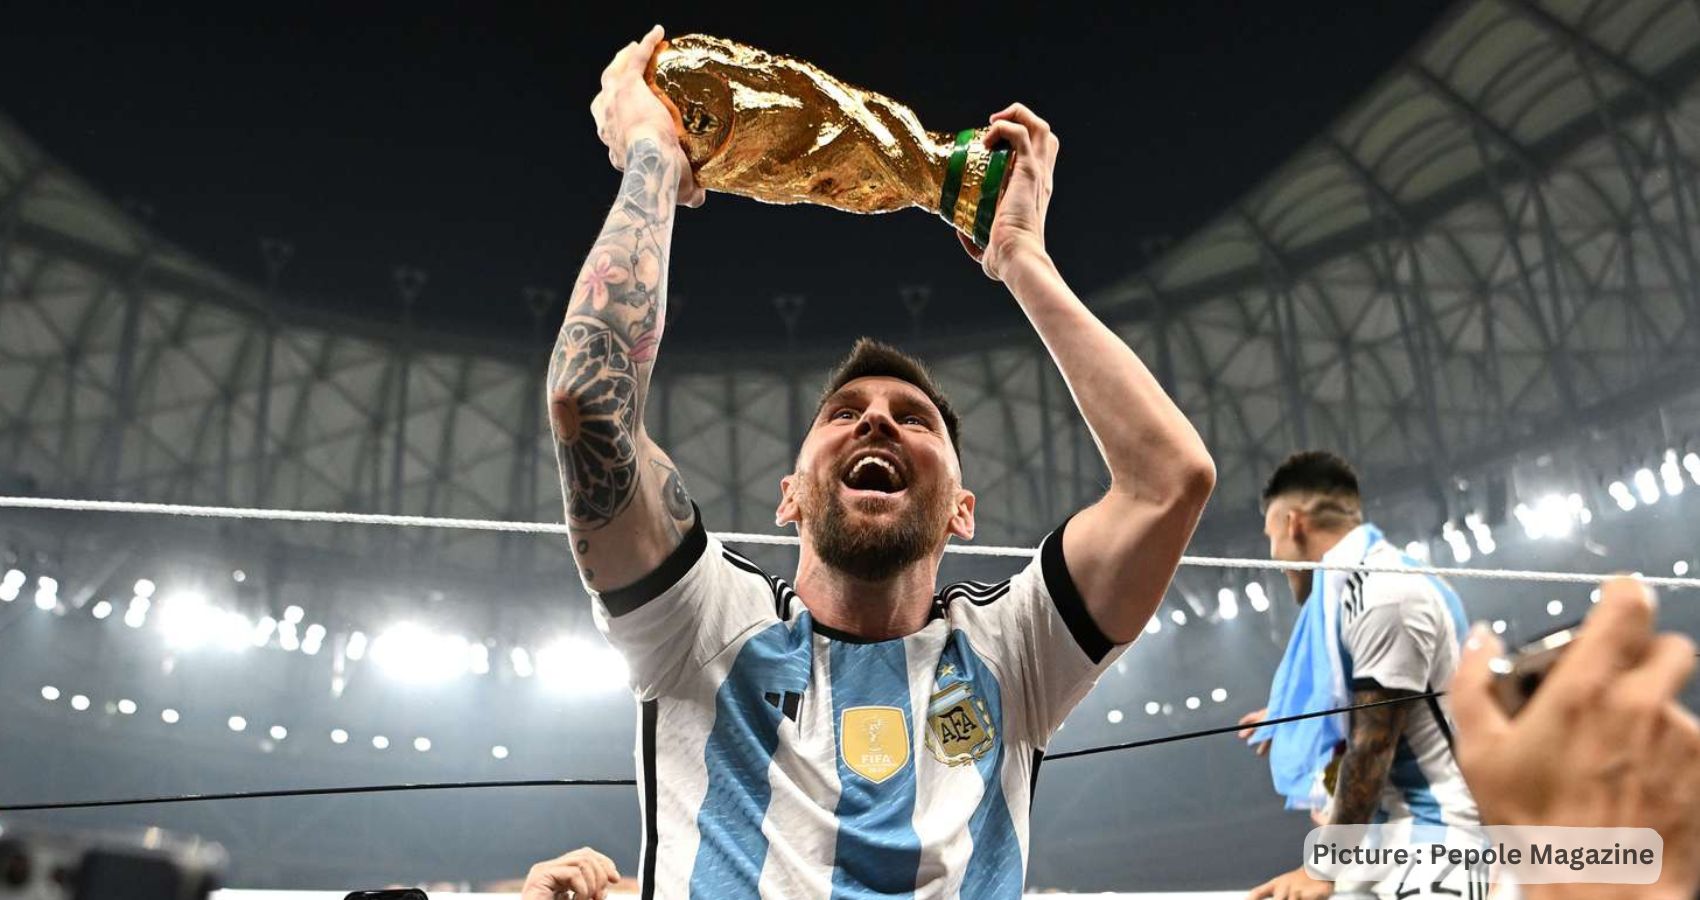 Lionel Messi World Cup Instagram Post Is Most-Liked Ever